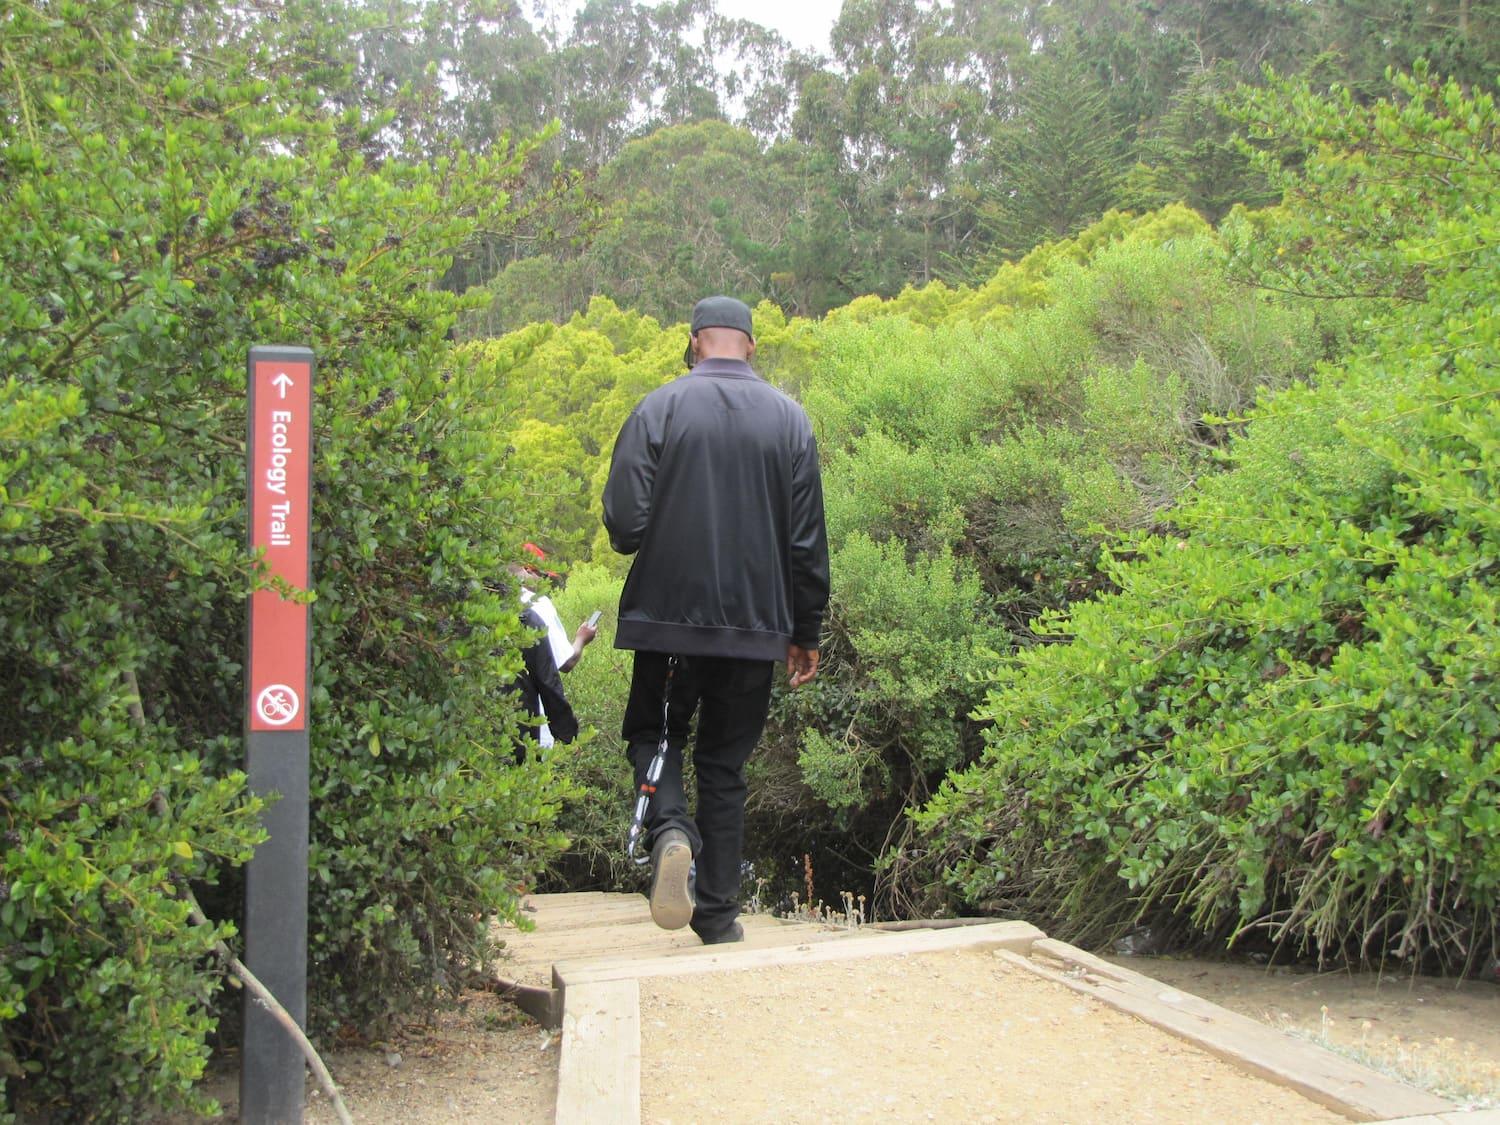 Man enters the southern trailhead for the Ecology Trail at Inspiration Point.